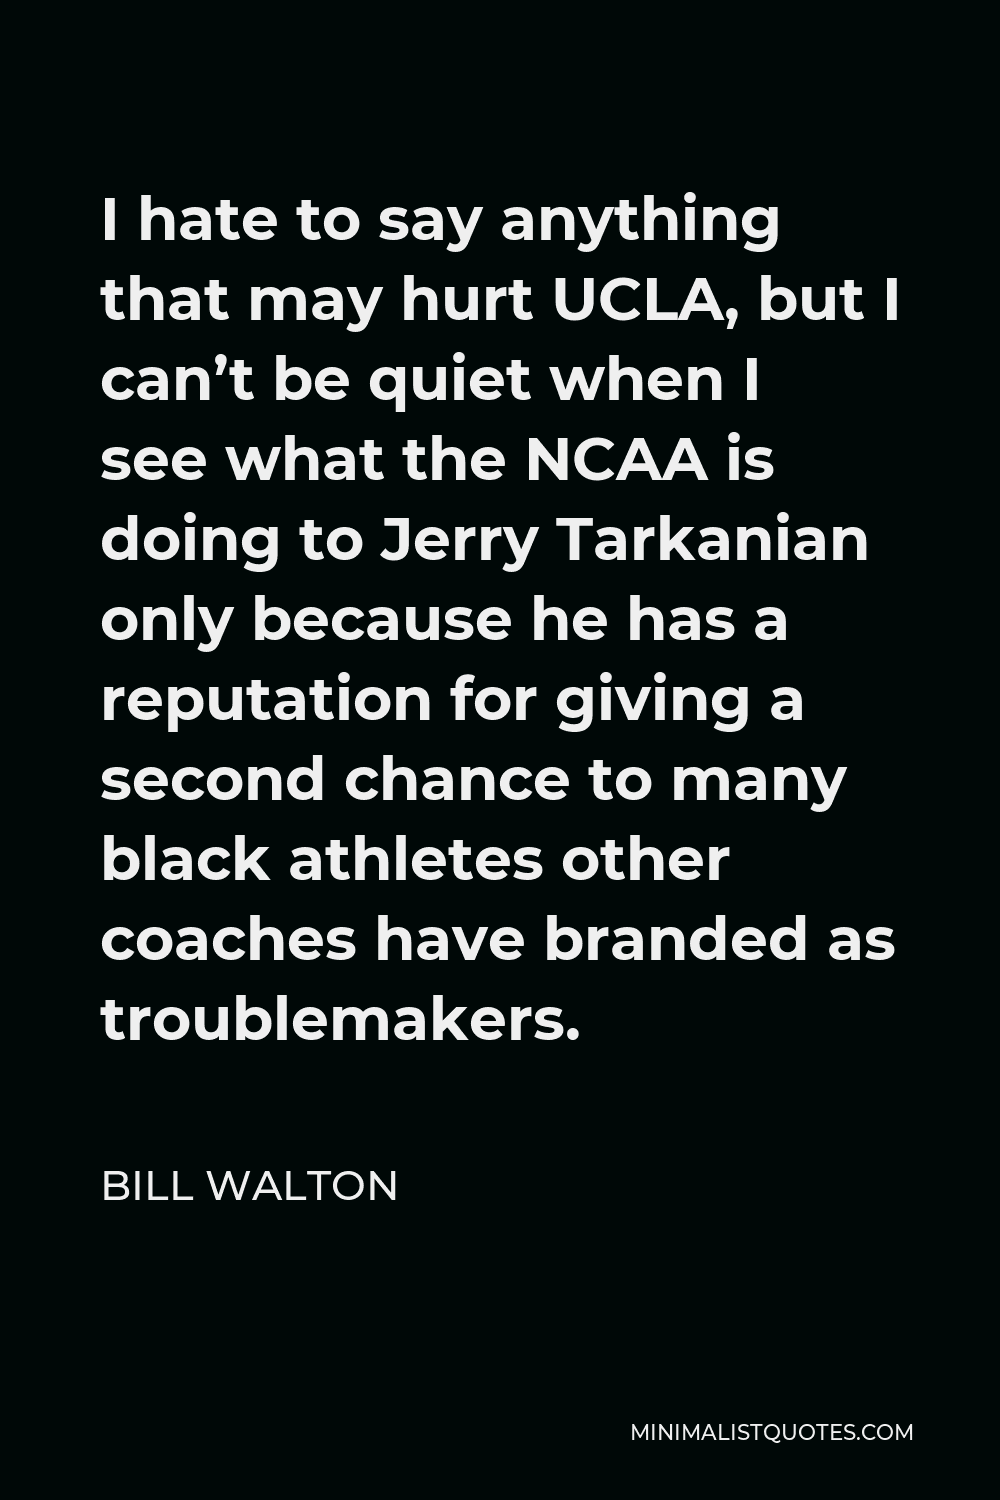 Bill Walton Quote - I hate to say anything that may hurt UCLA, but I can’t be quiet when I see what the NCAA is doing to Jerry Tarkanian only because he has a reputation for giving a second chance to many black athletes other coaches have branded as troublemakers.